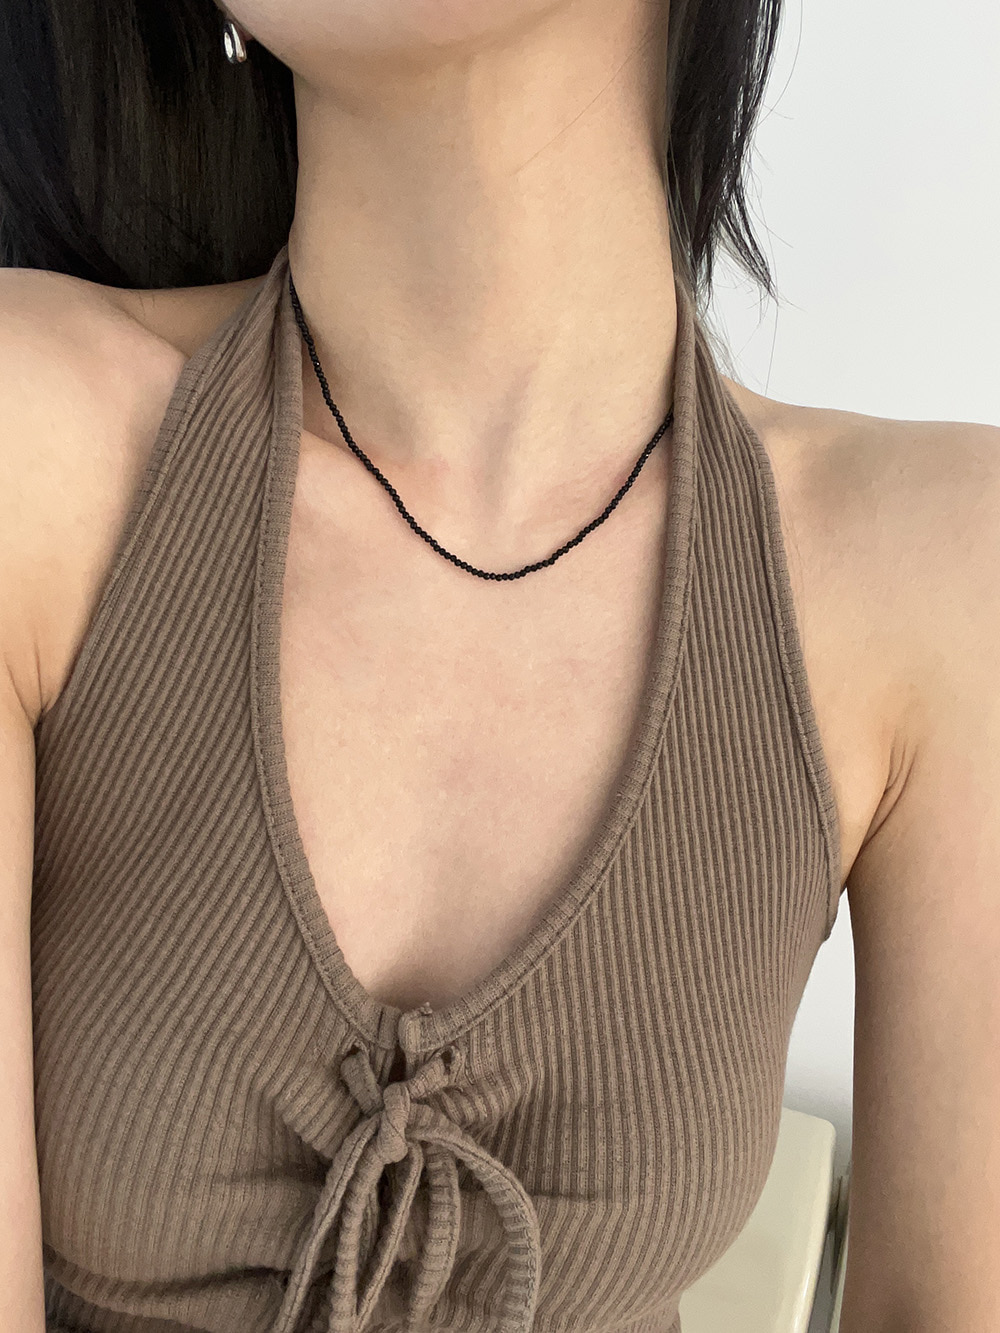 [92.5 silver] Black beads necklace